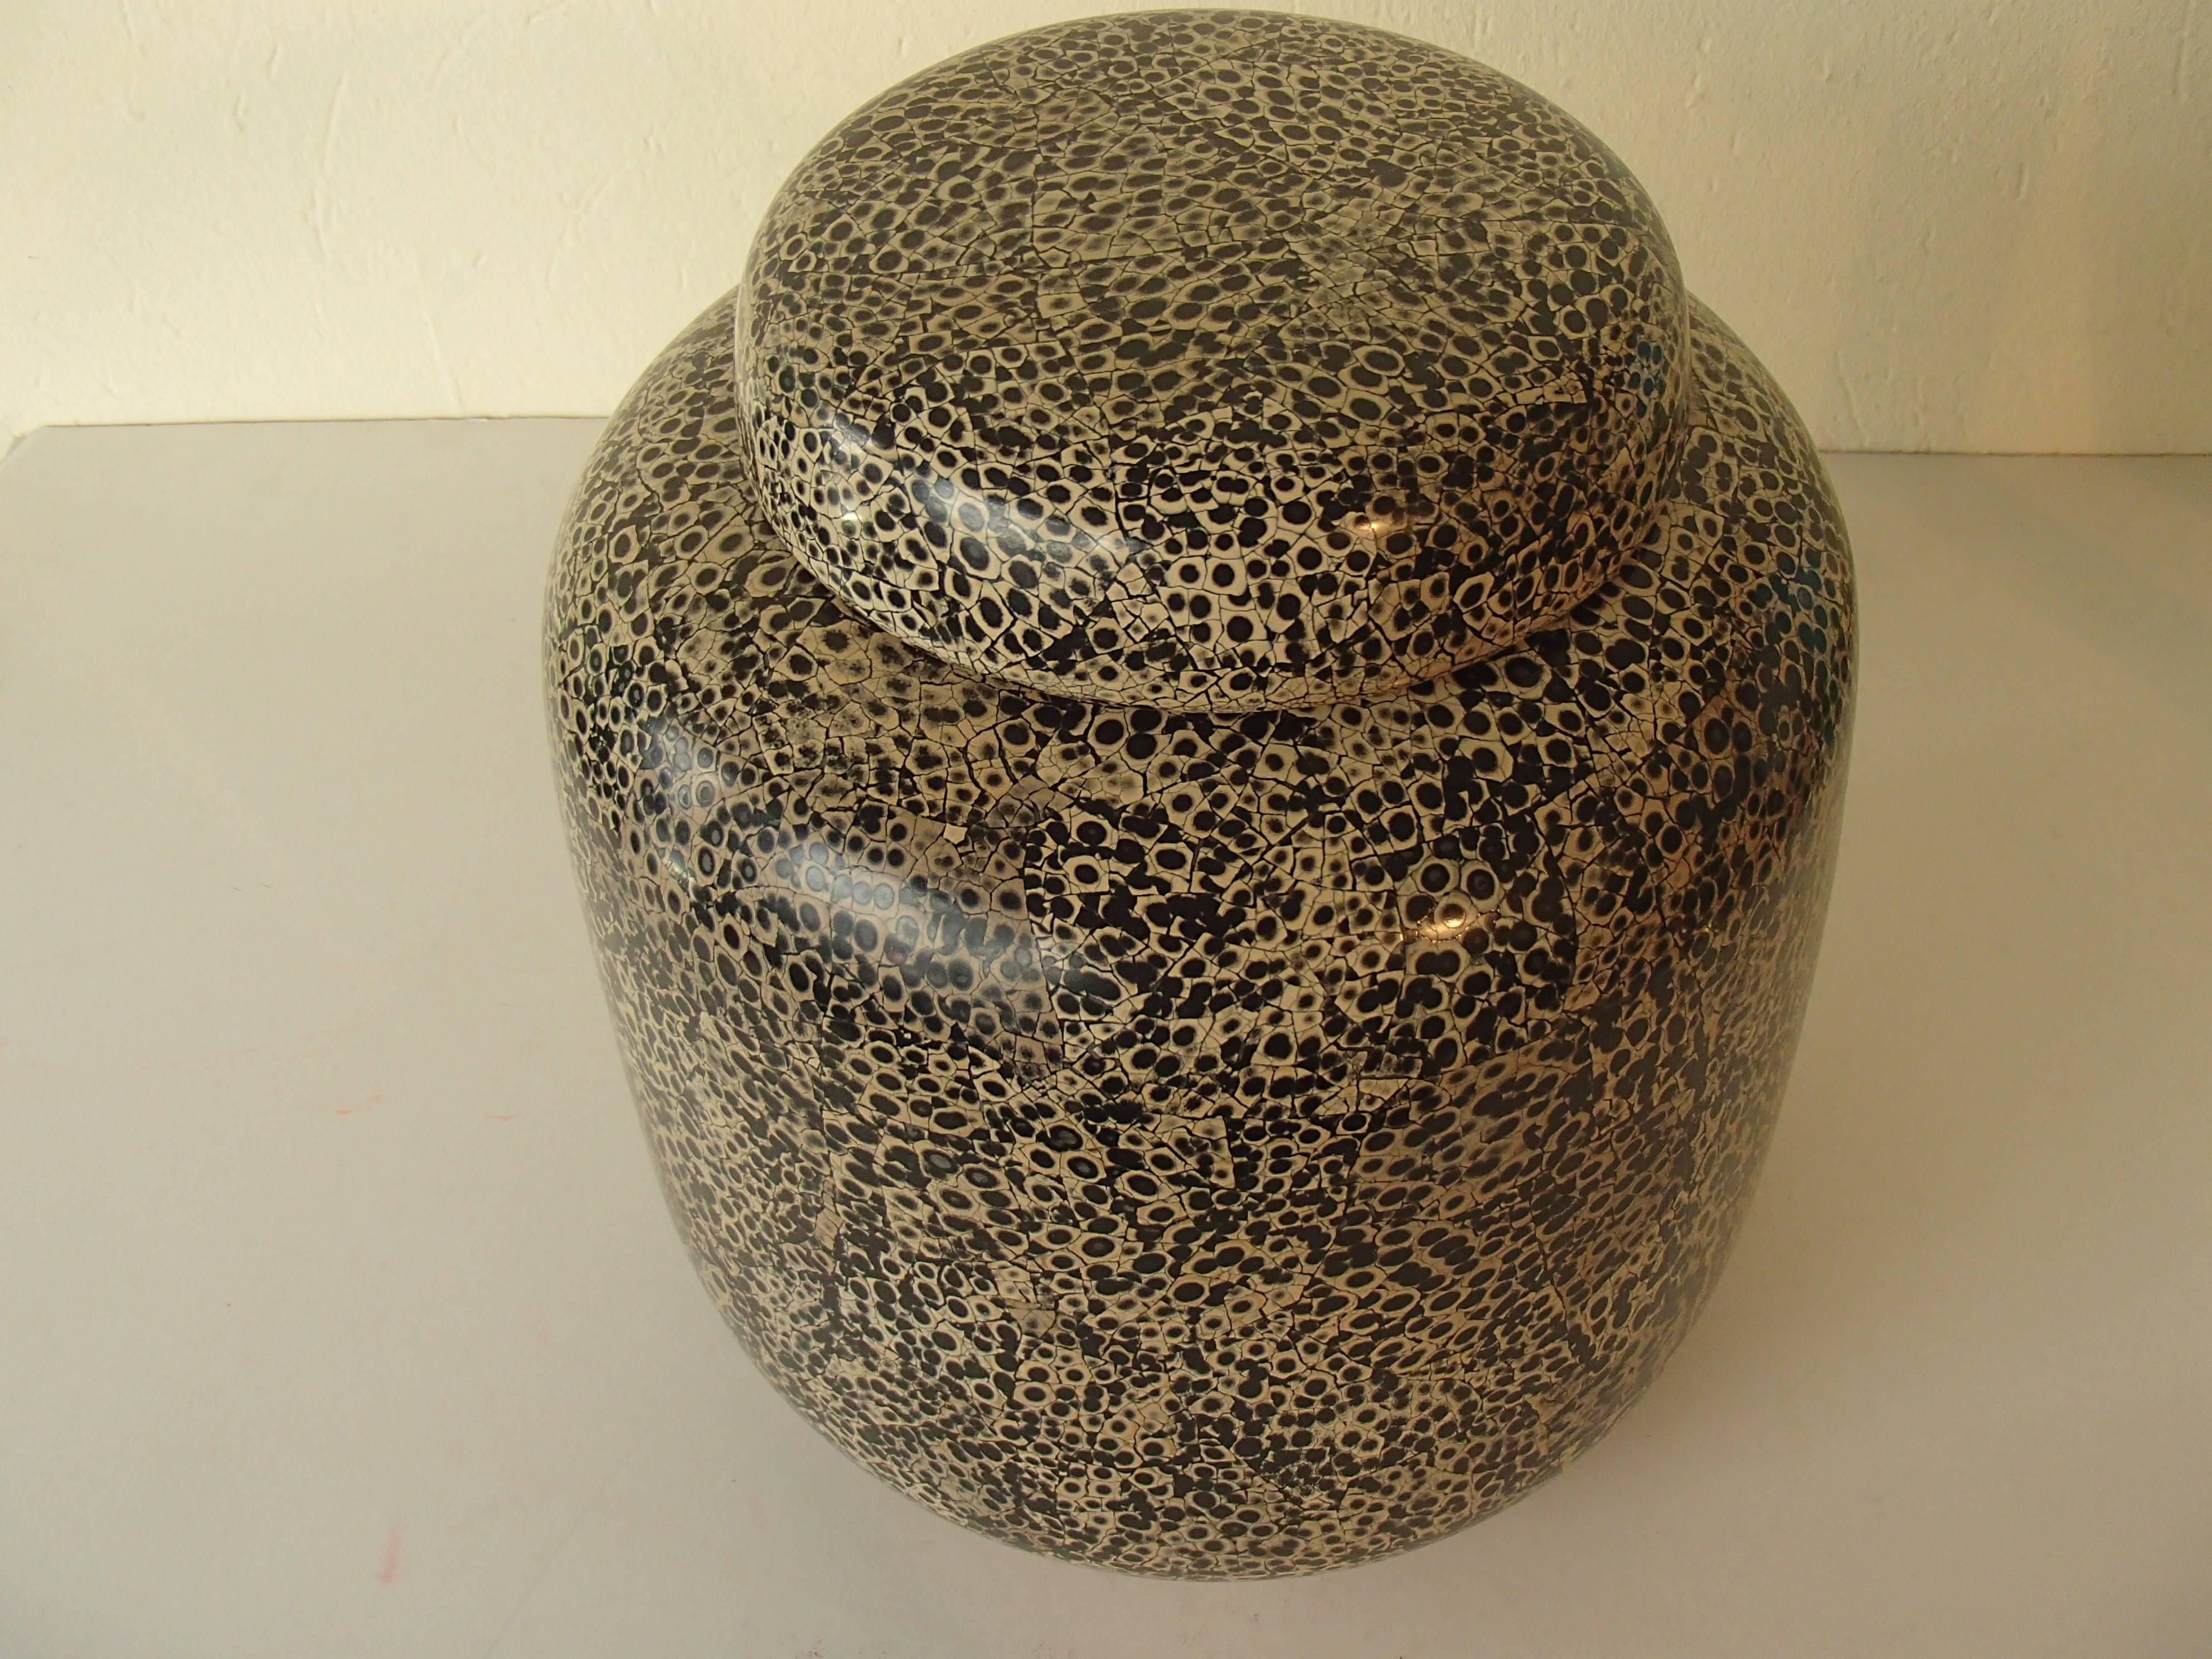 Late 20th Century Modern Ceramic Vase with Lid Cream and Black by Les Comproir D'annam